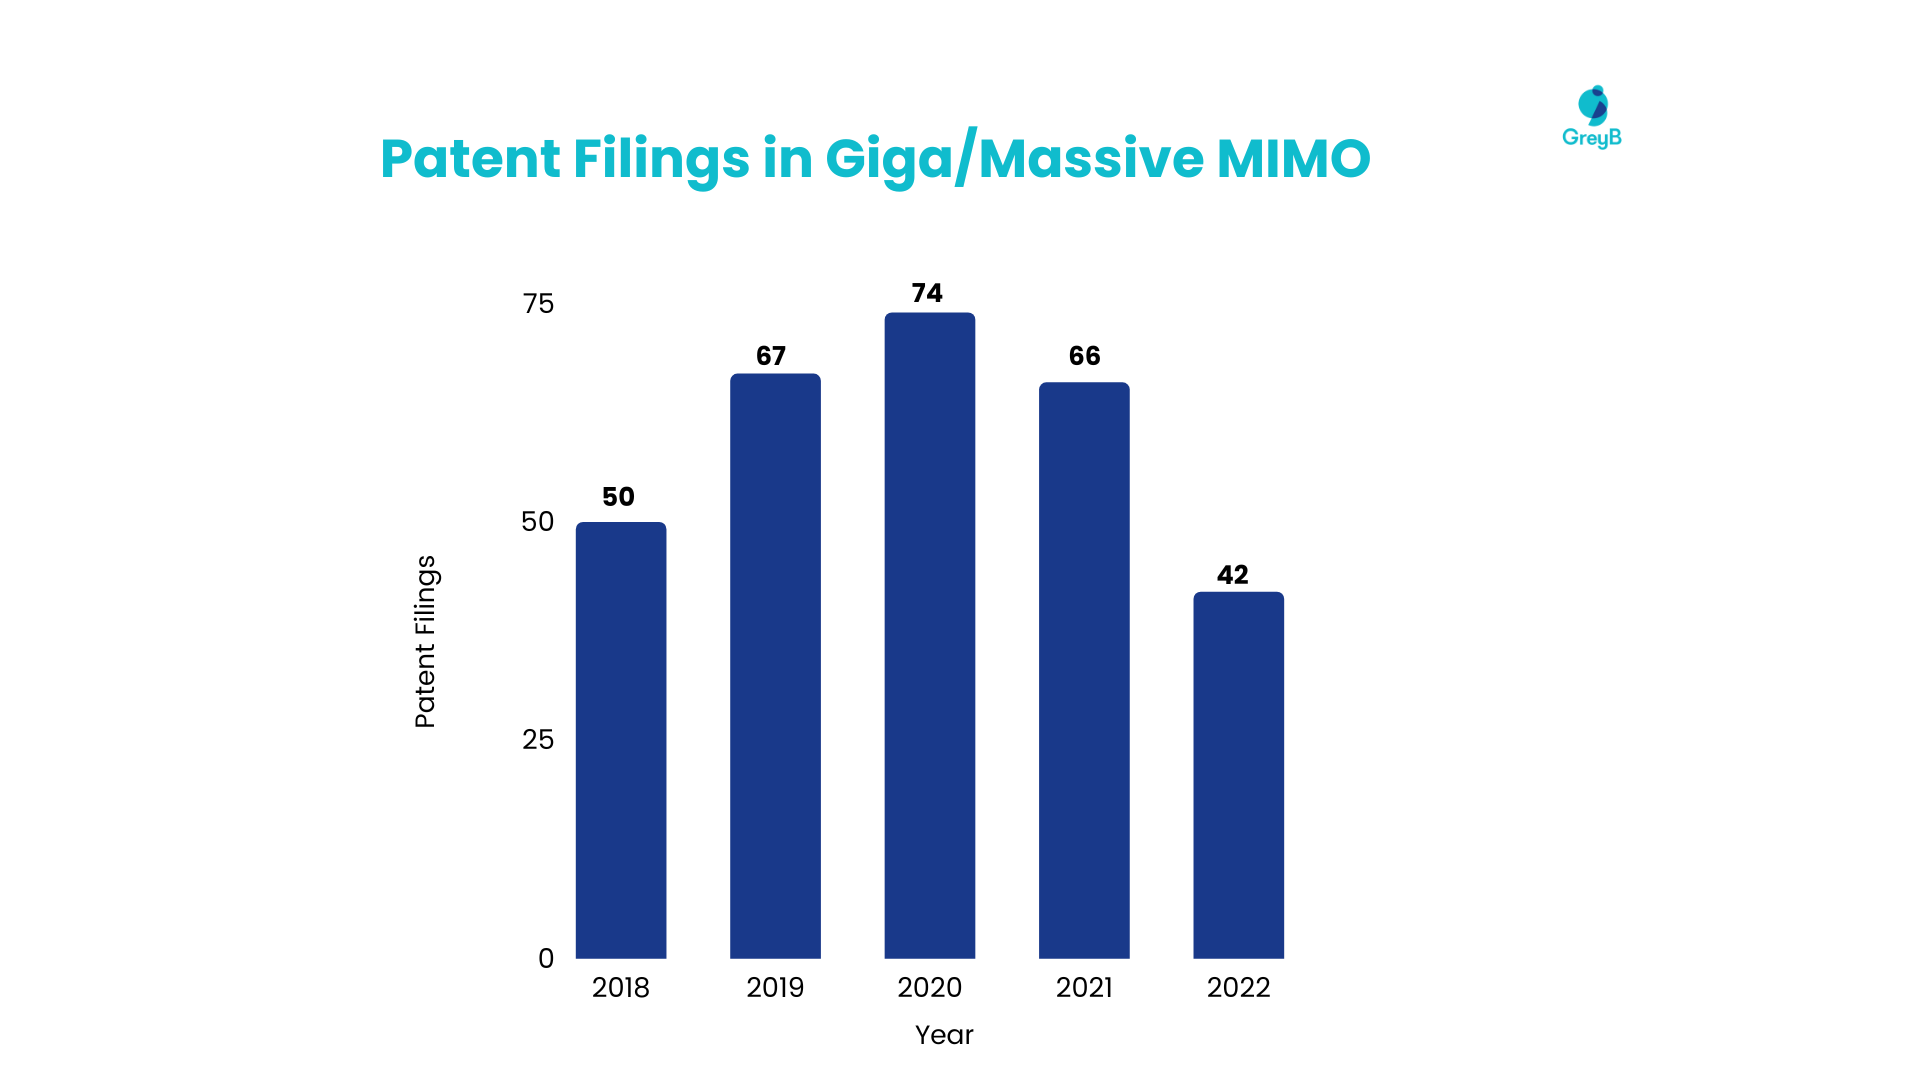 6G Enabling technologies: Patent Filings in GigaMassive MIMO